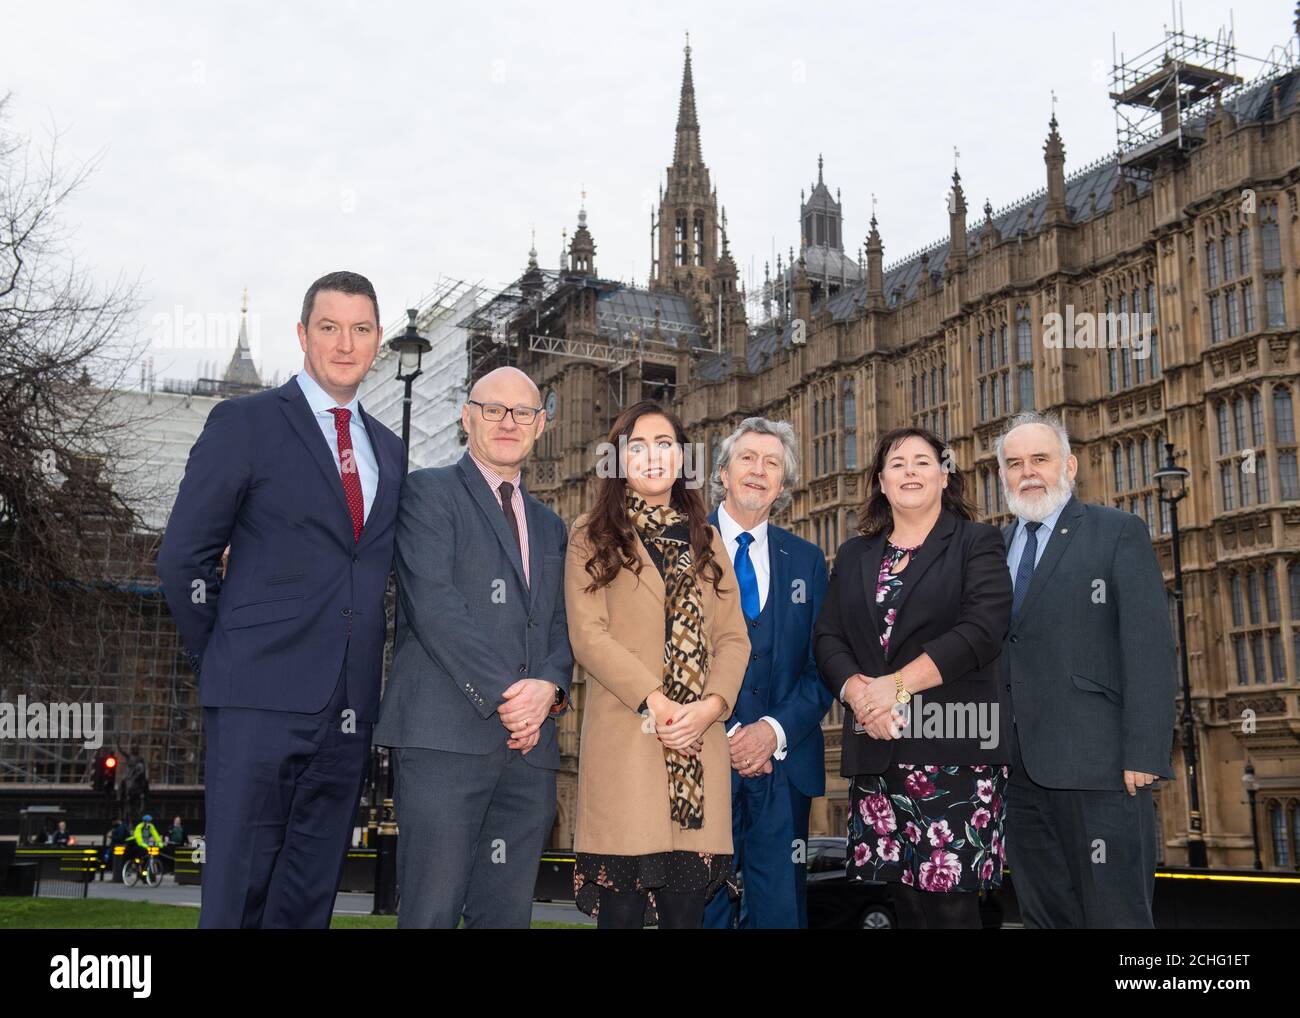 Recently elected Sinn Fein MPs (left to right) John Finucane, Paul Maskey, Orfhlaith Begley, Mickey Brady, Michelle Gildernew, and Francie Molloy, outside the Houses of Parliament, in Westminster, London. Stock Photo